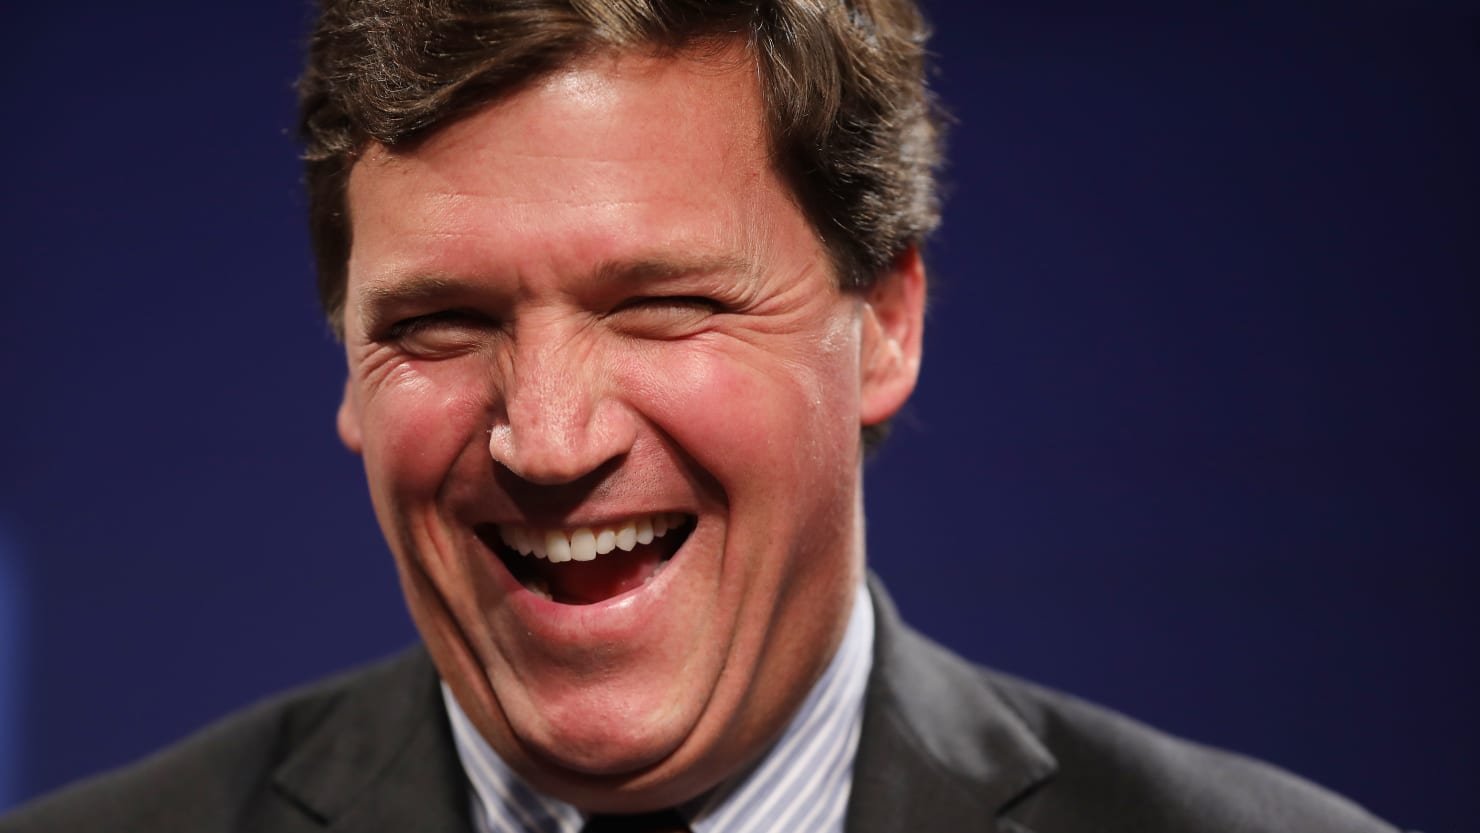 Russian Media Told to Promote Tucker Carlson ‘as Much as Possible,’ Report Says